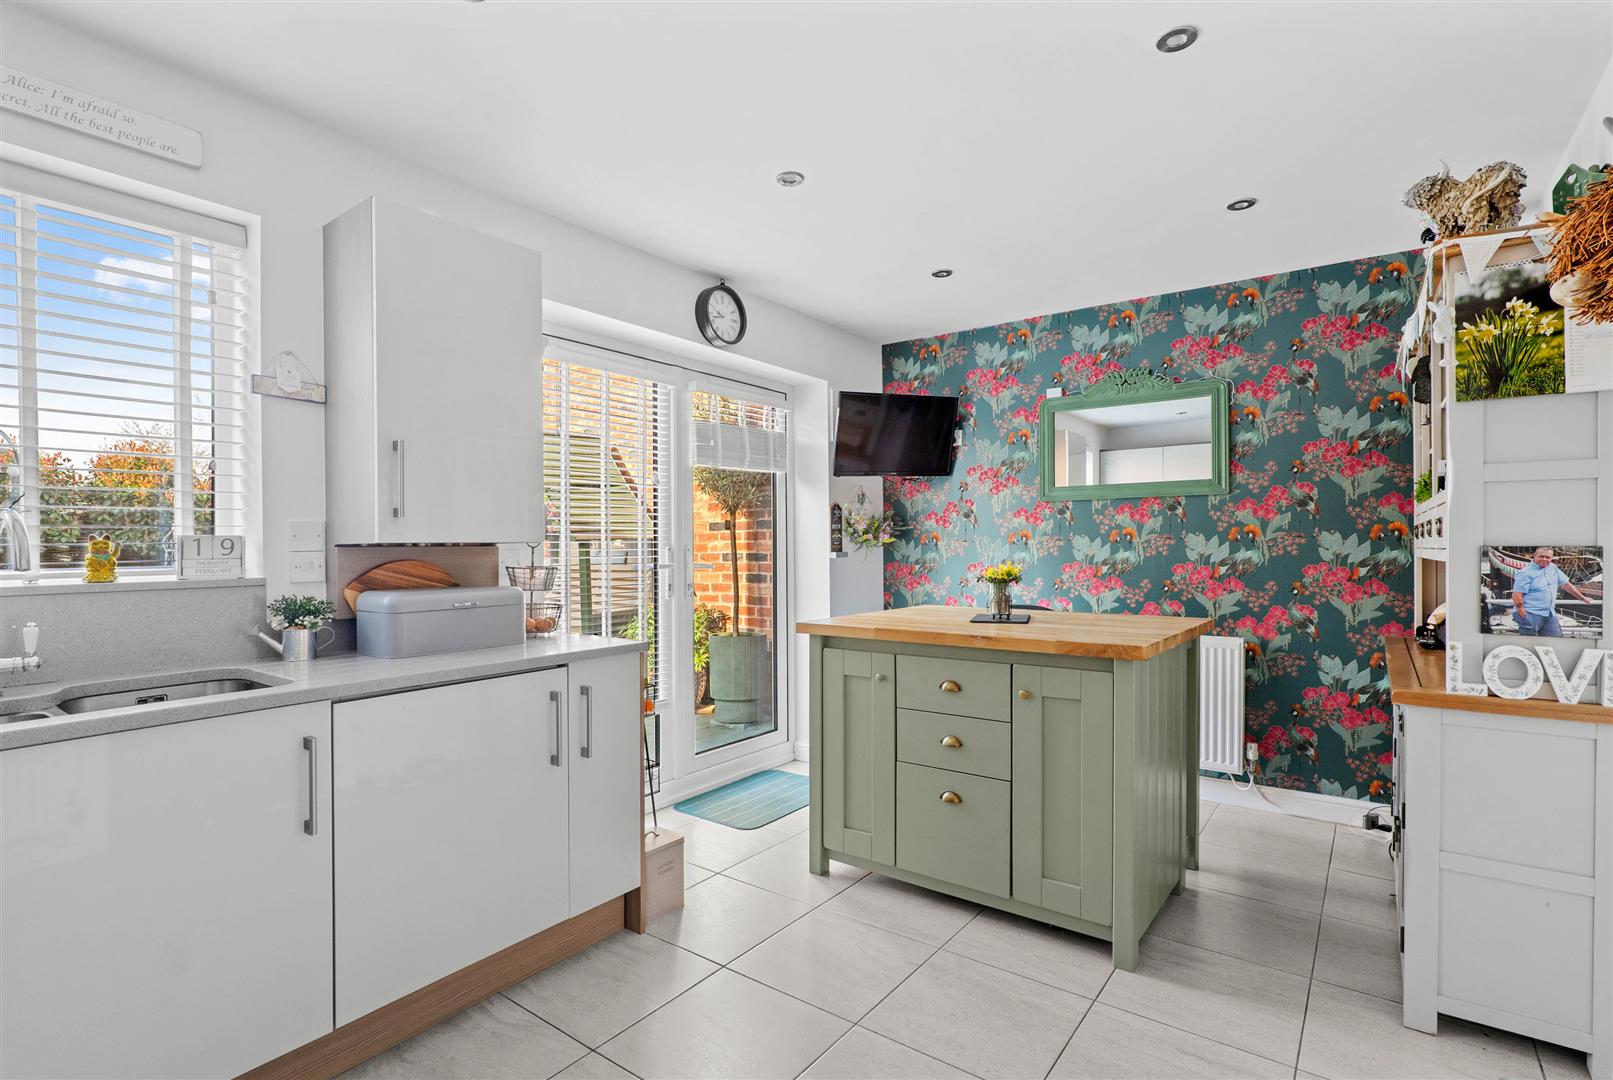 3 bed detached house for sale in Camphill, Stourbridge  - Property Image 2